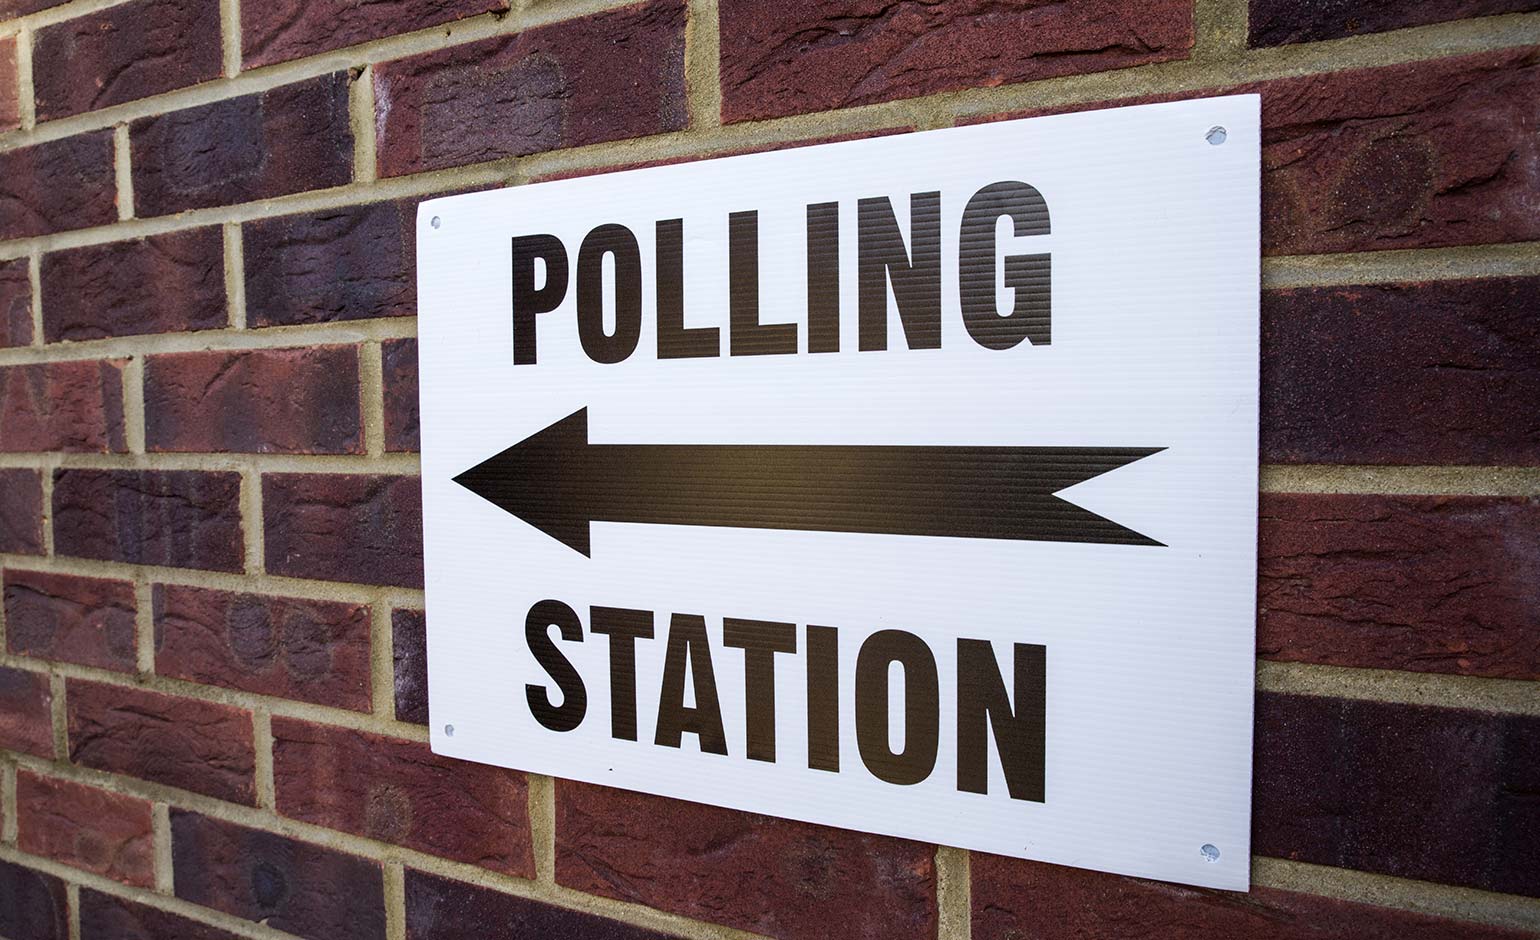 Last chance to register to vote ahead of upcoming PCC election